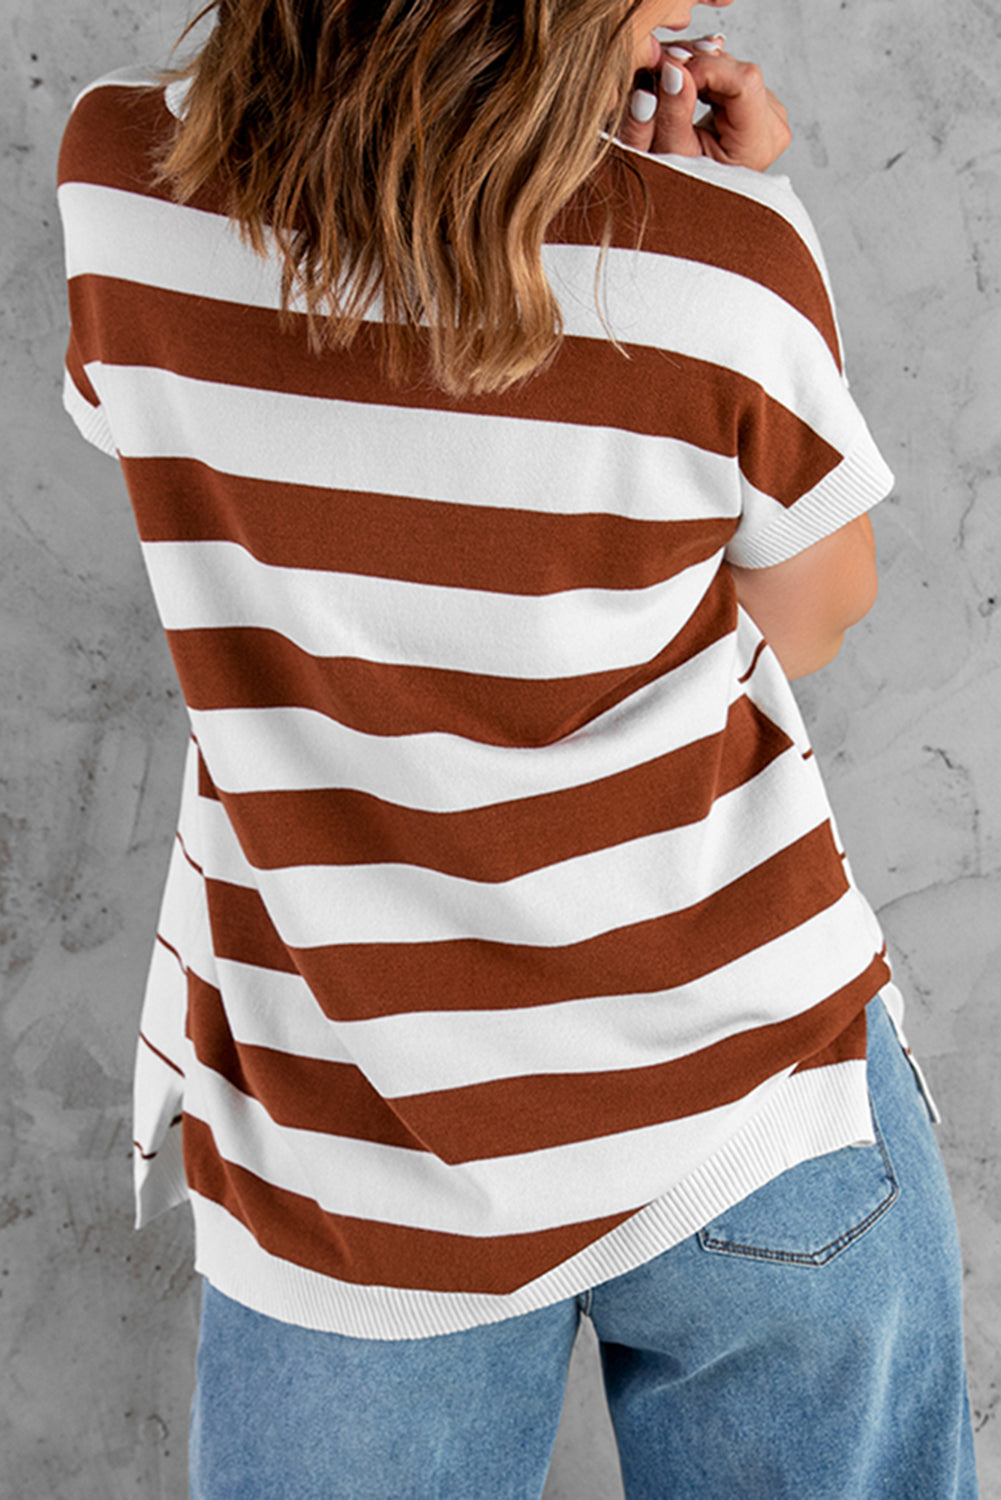 Comfy White Brown Striped Knit Sweater Short Sleeve Top